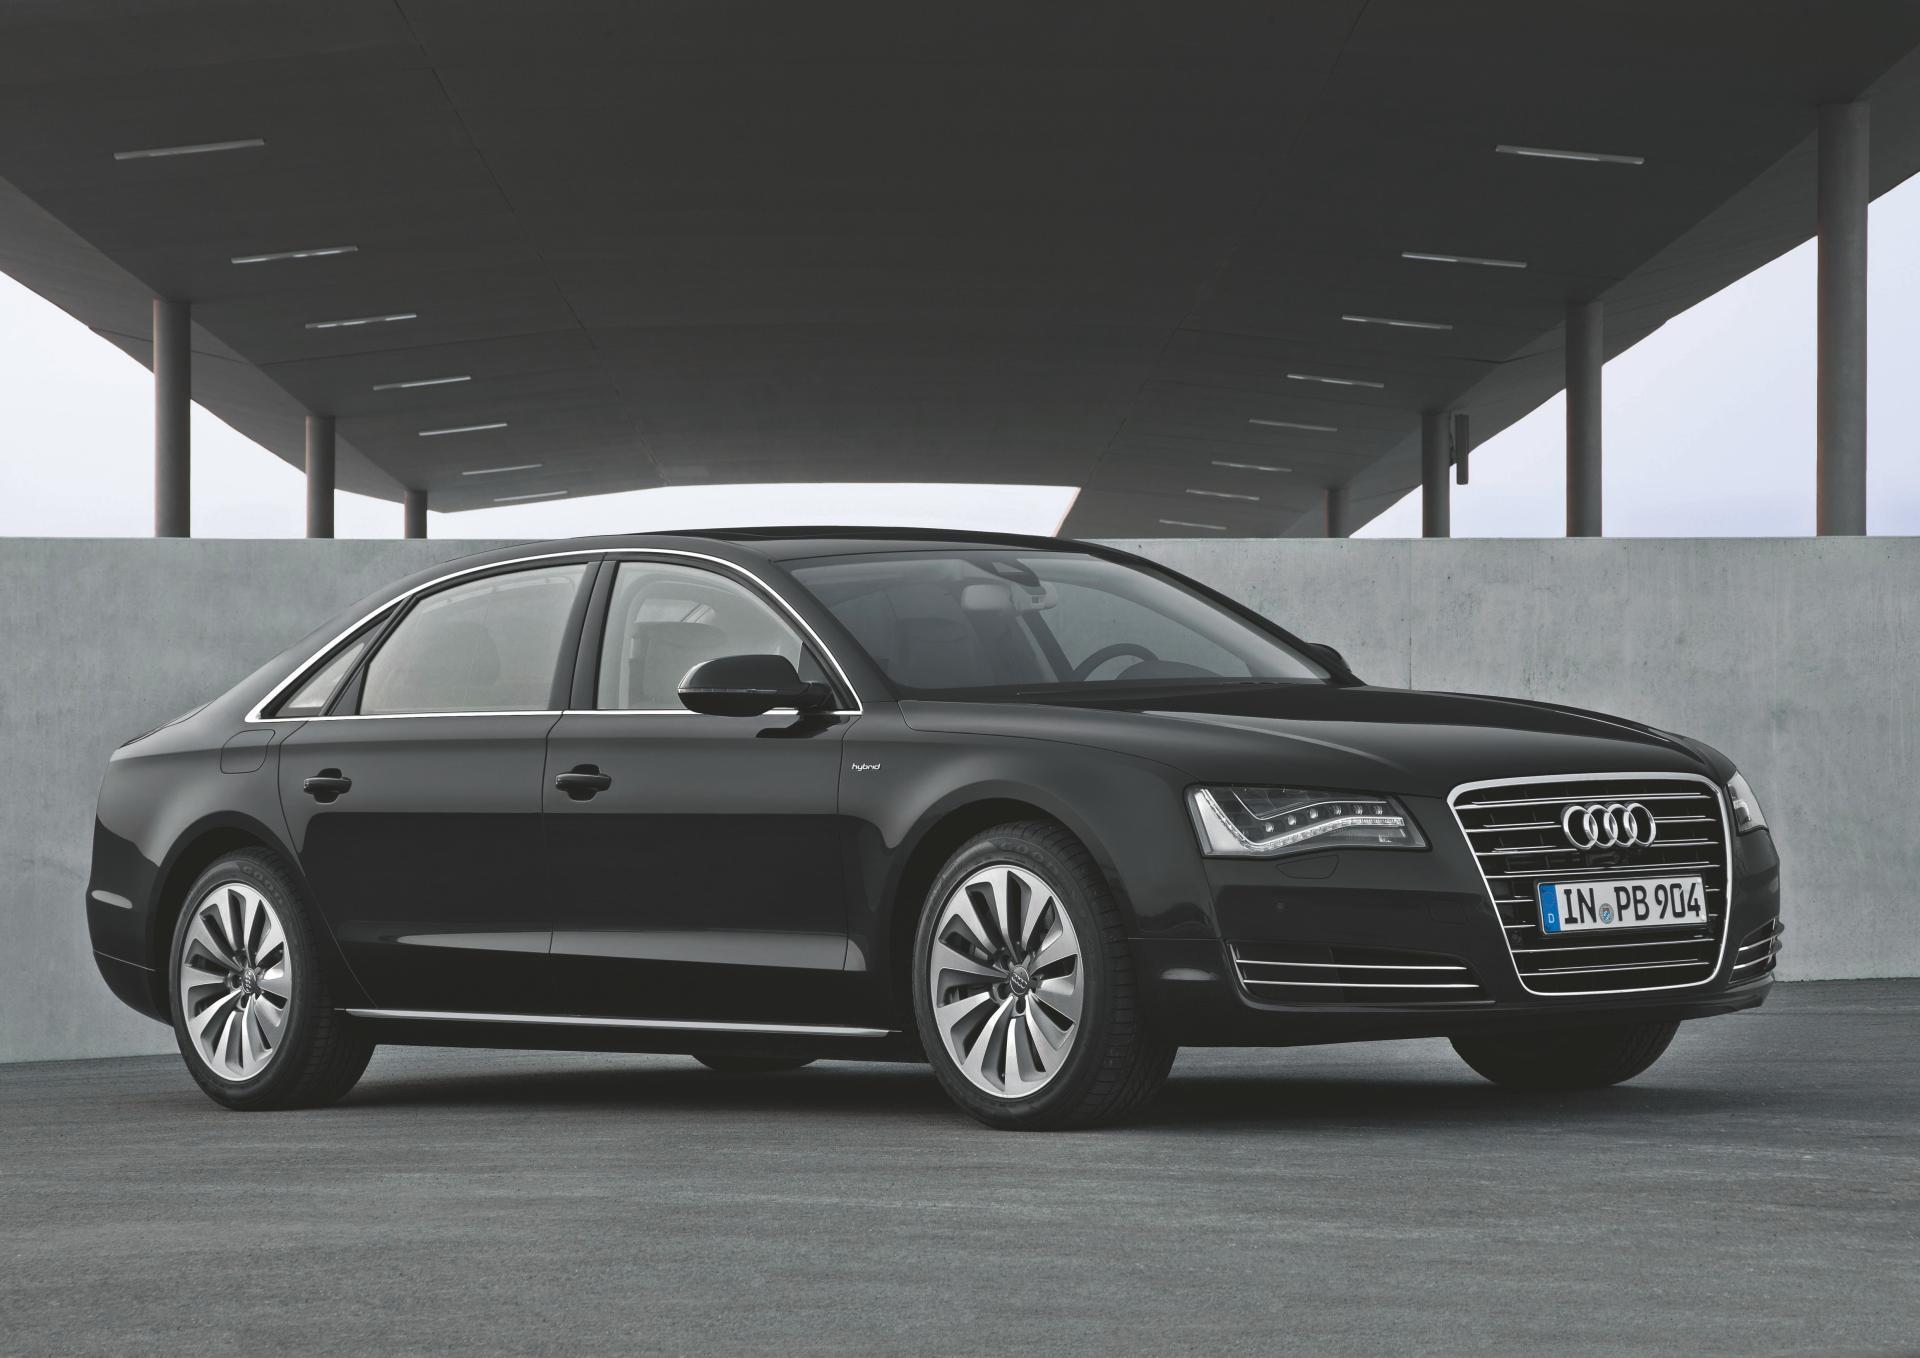 Audi A8 L News and Information